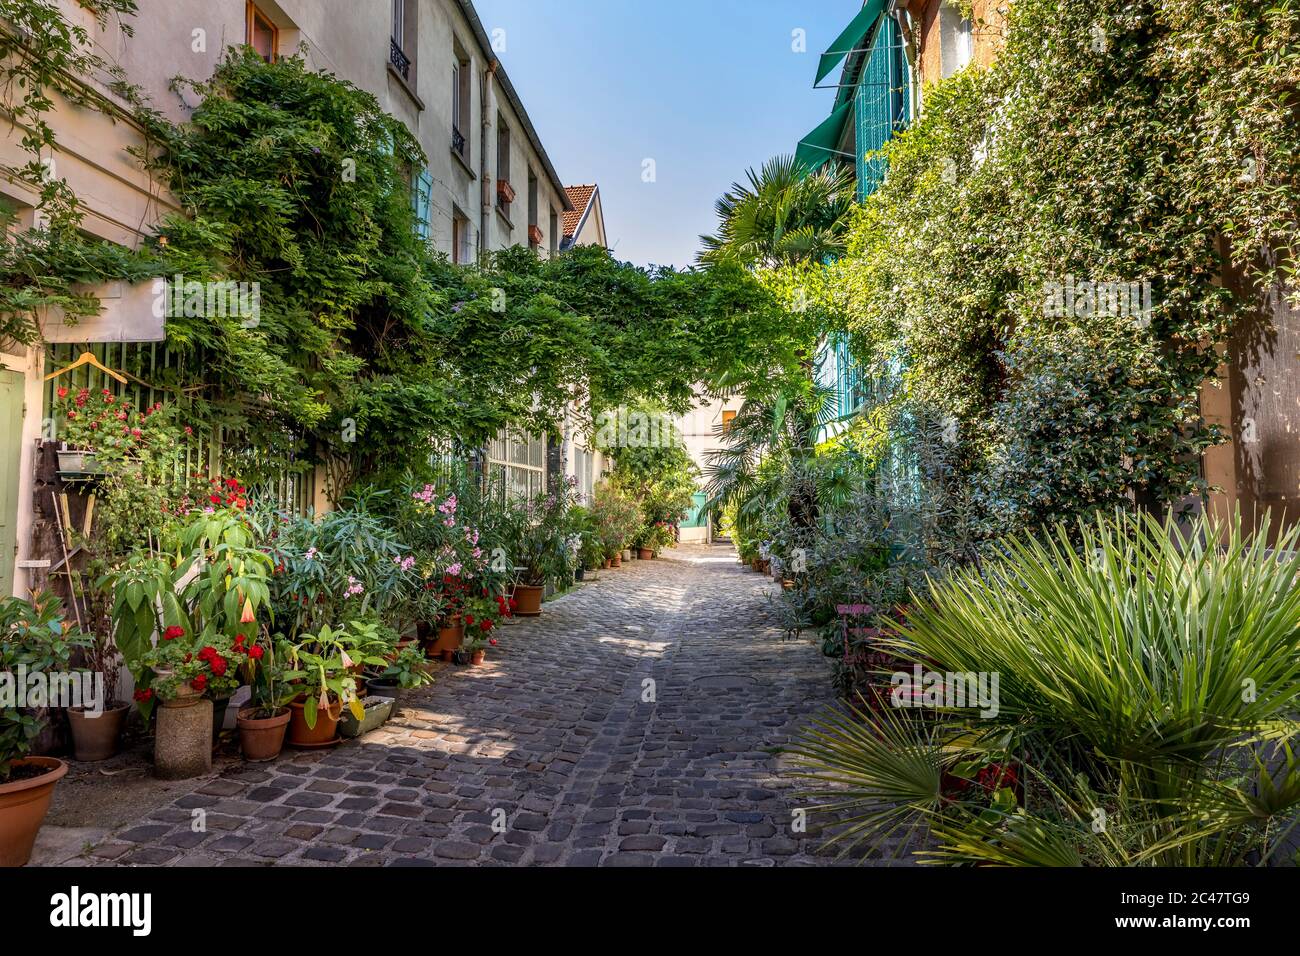 Paris, France - June 24, 2020: The Figuier street with its vegetation in Paris 11th district Stock Photo